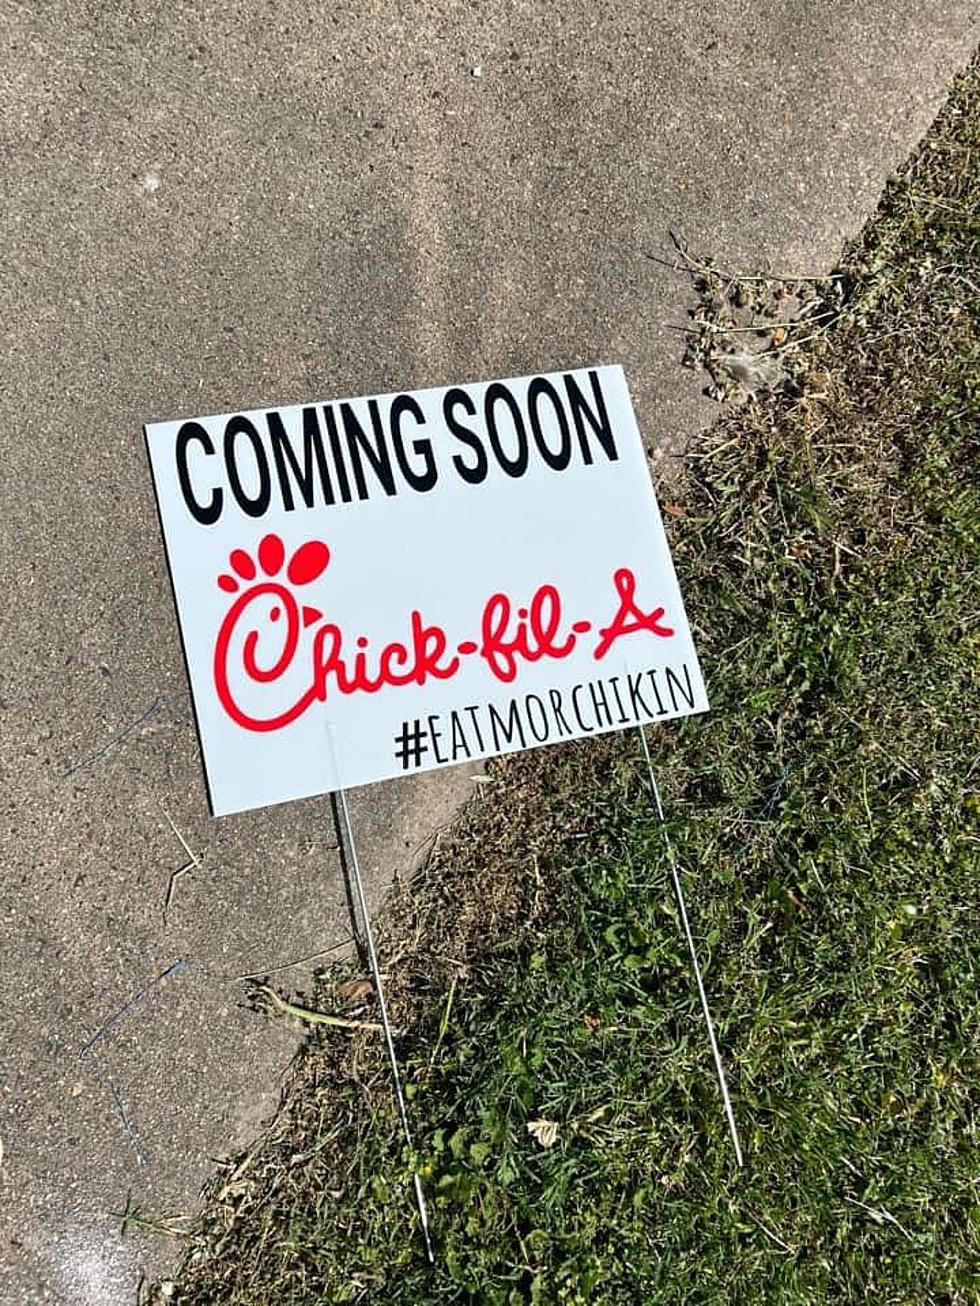 Pranksters Announce The Opening Of A Chick-Fil-A Location That Doesn&#8217;t Exist